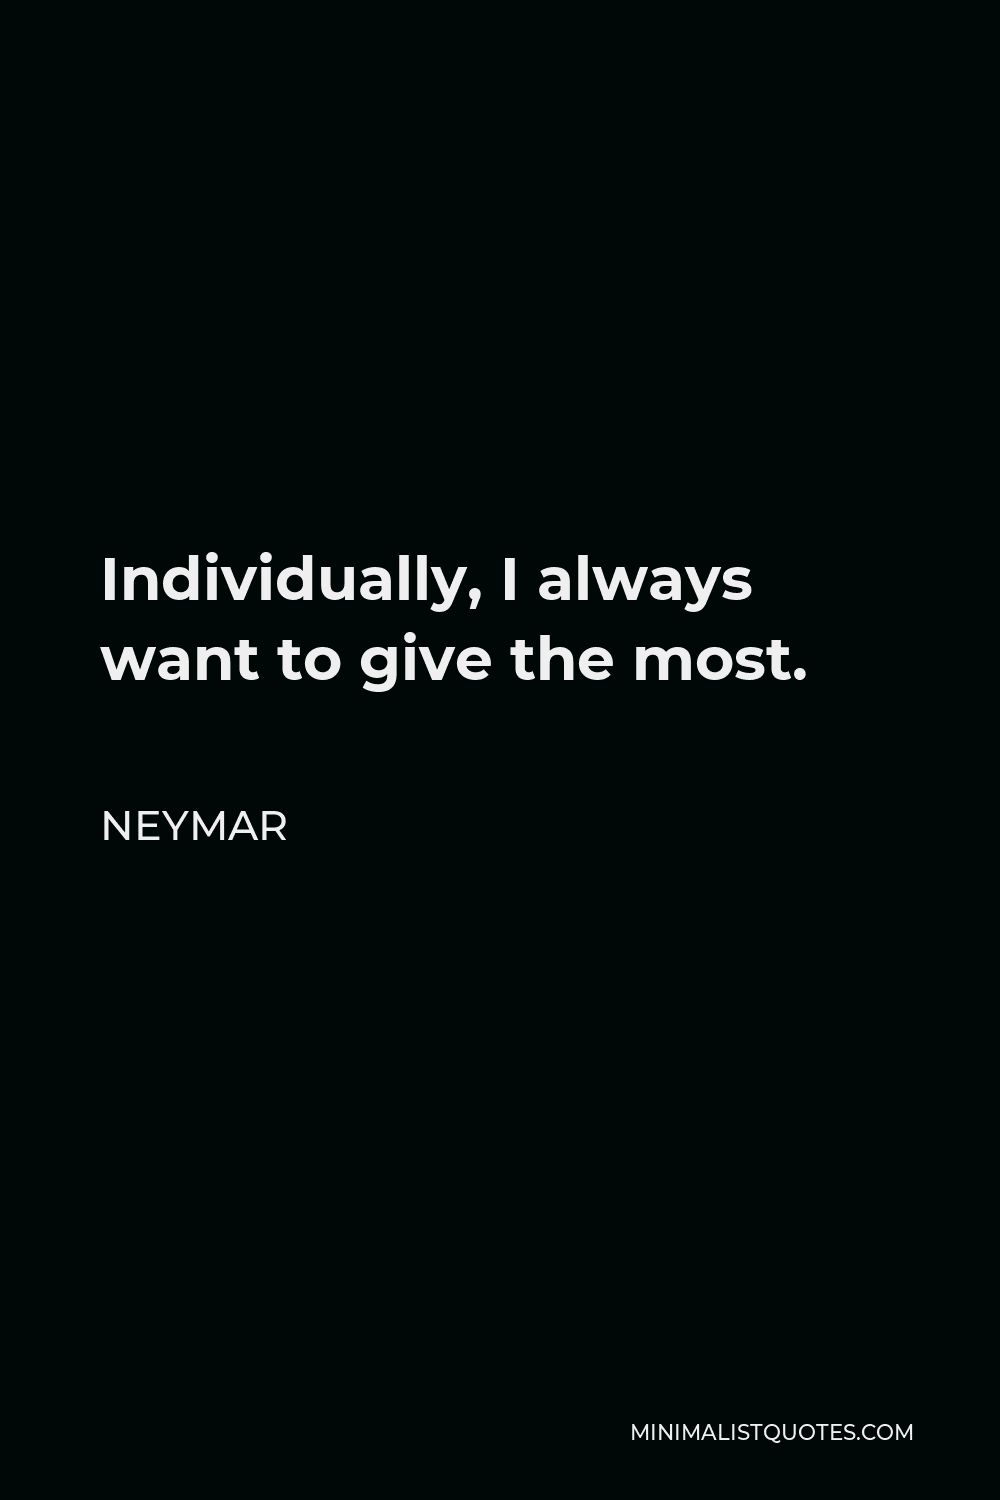 Neymar Quote - Individually, I always want to give the most.